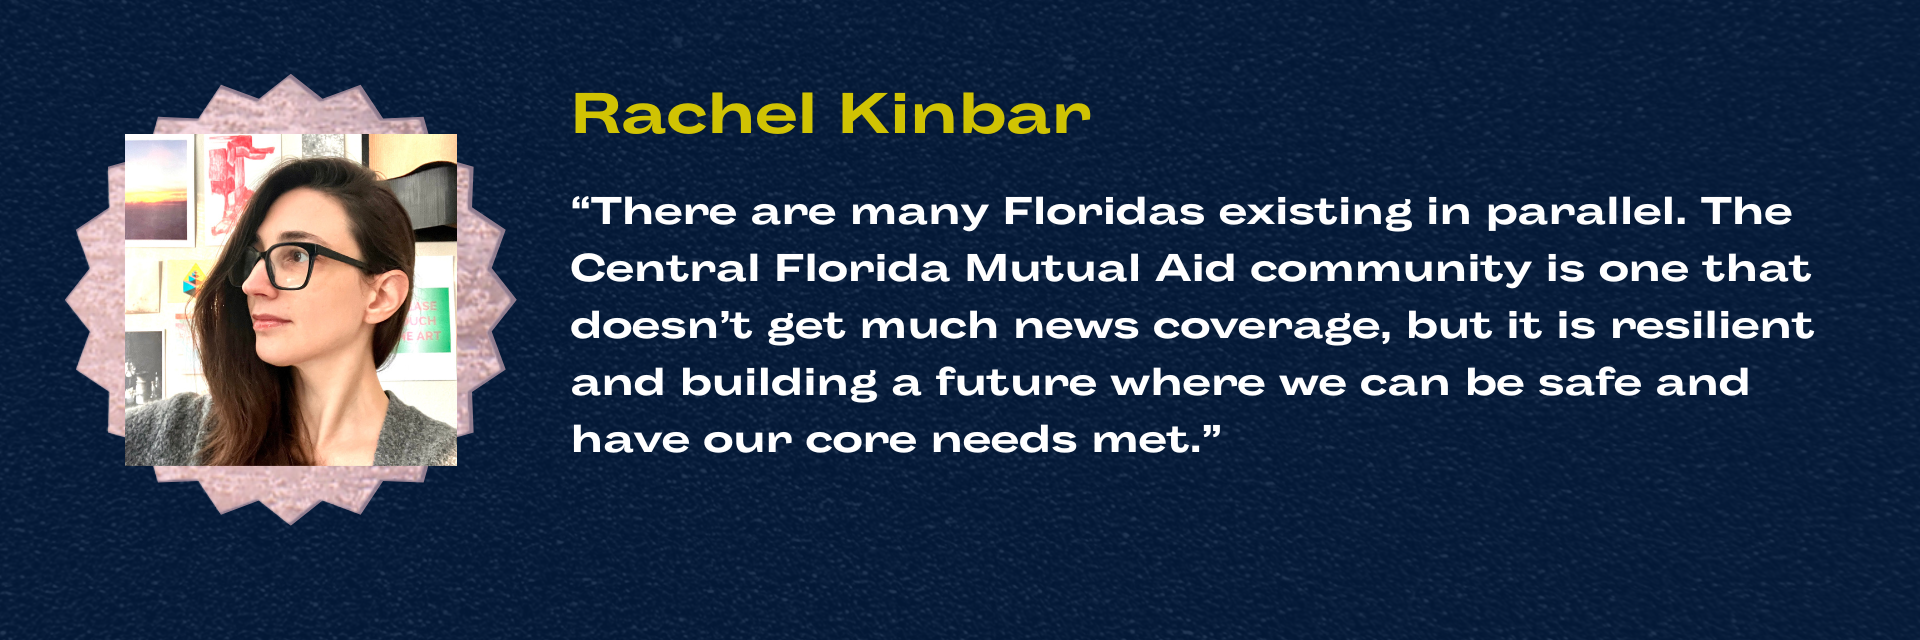 image and quote from Rachel Kinbar